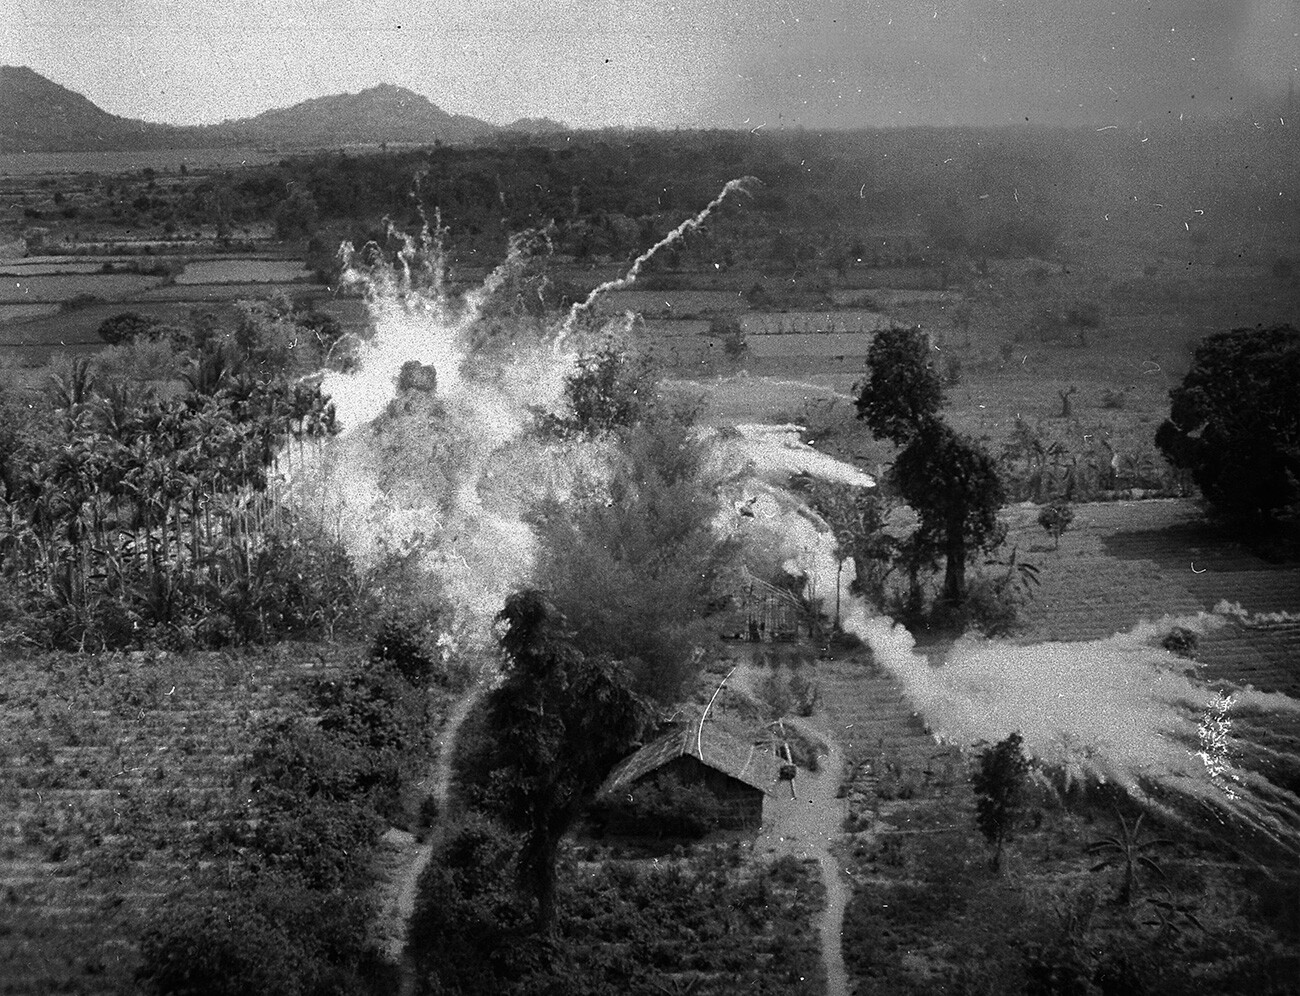 Napalm bombs strike Viet Cong structures south of Saigon in 1965.